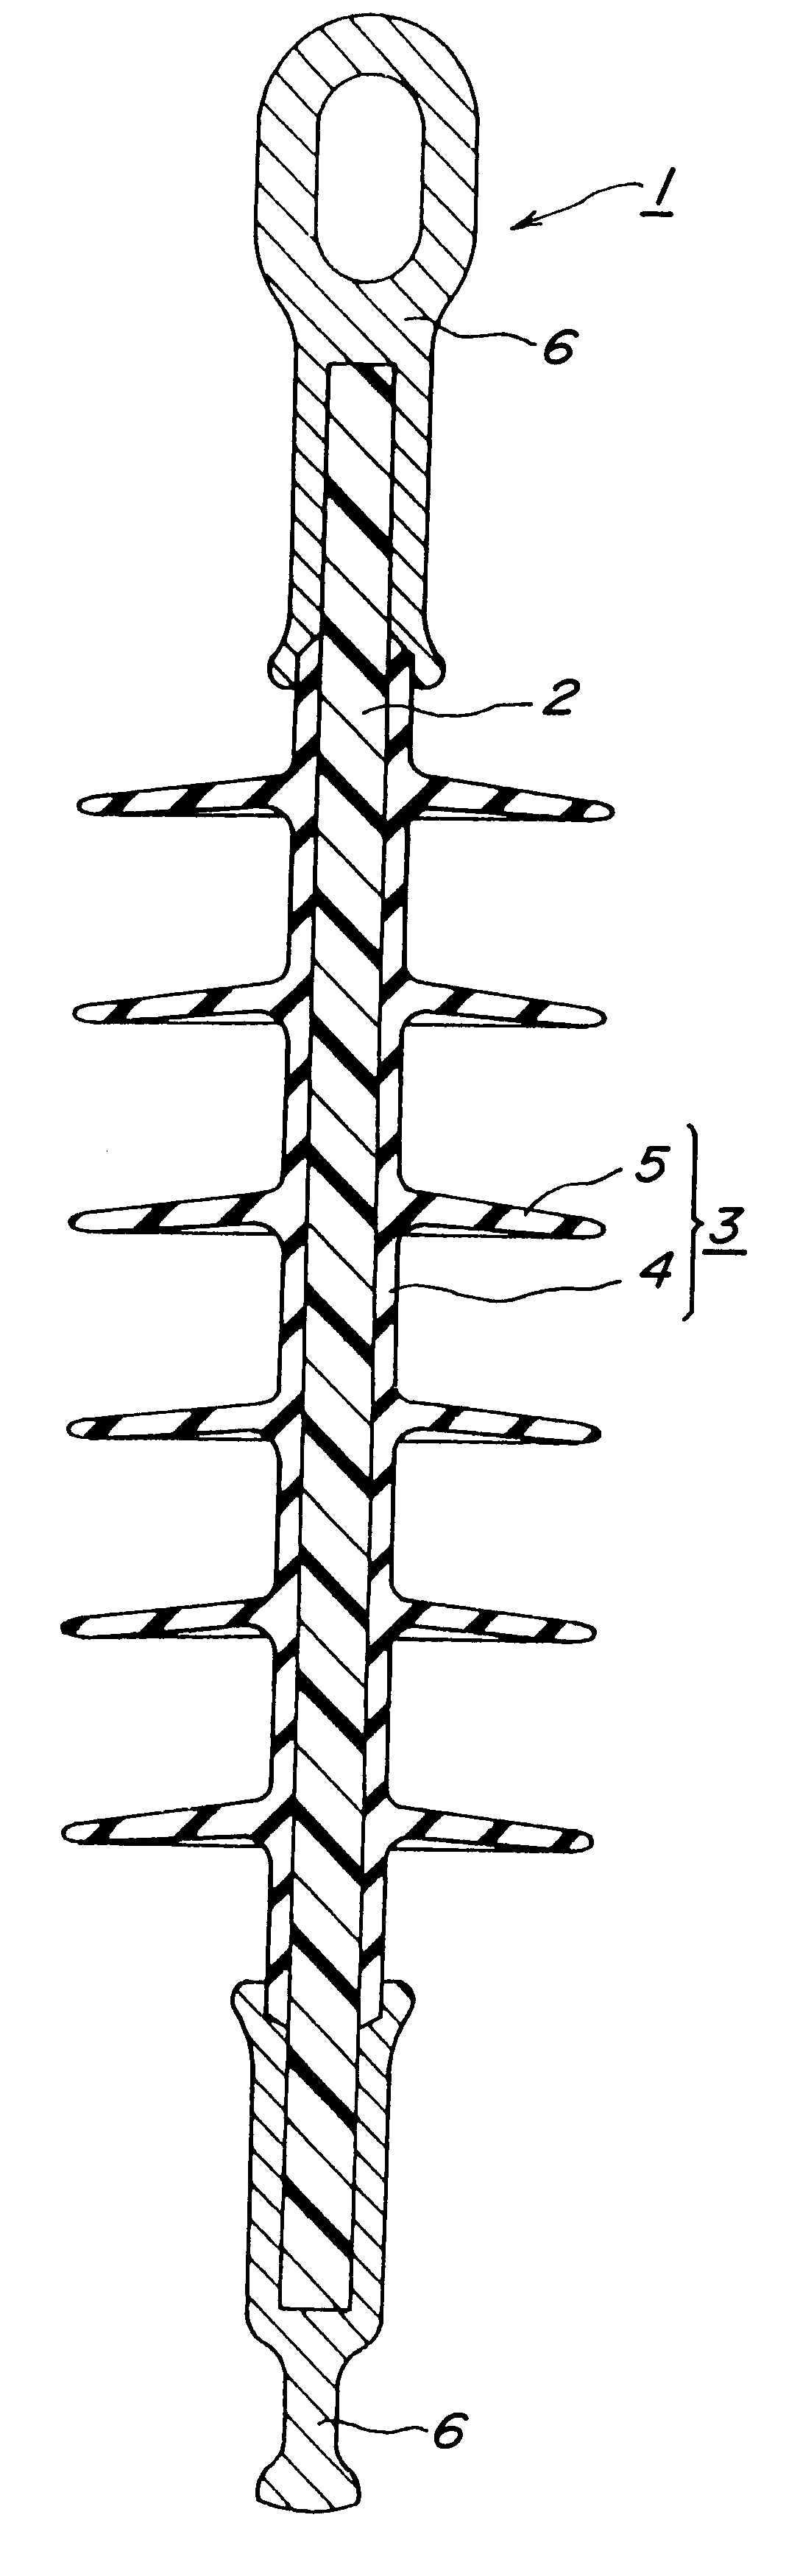 Method of detecting overcoating rubber flowed in space between core member and securing metal fitting of polymer insulator